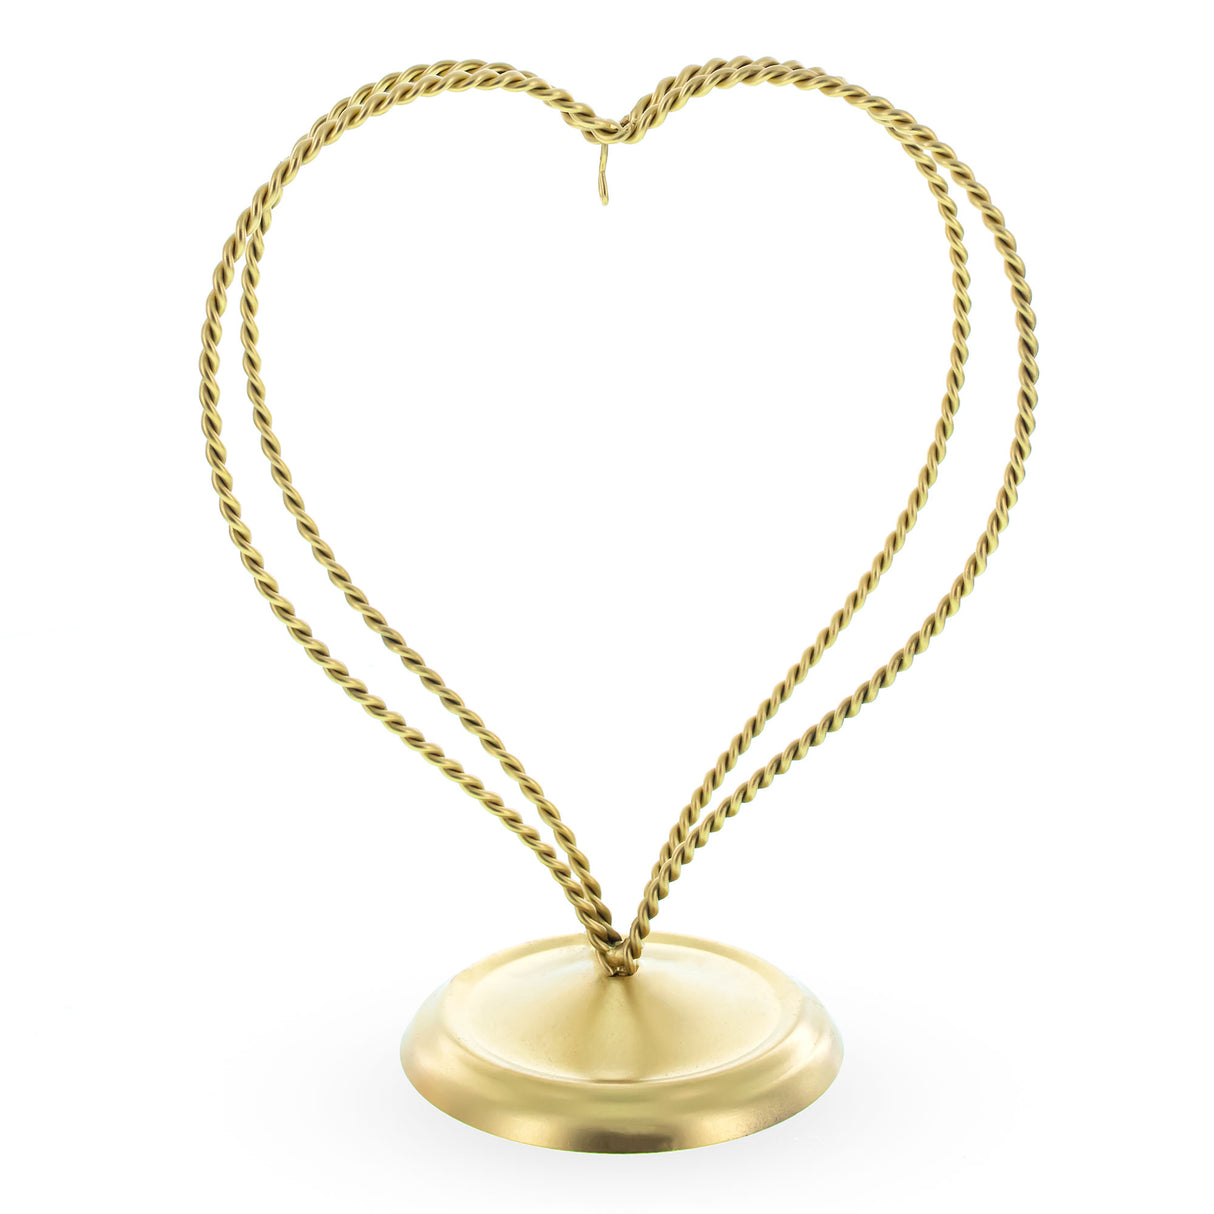 Double Swirled Heart Gold Metal Solid Round Base Ornament Display Stand 7.25 Inches in Gold color,  shape